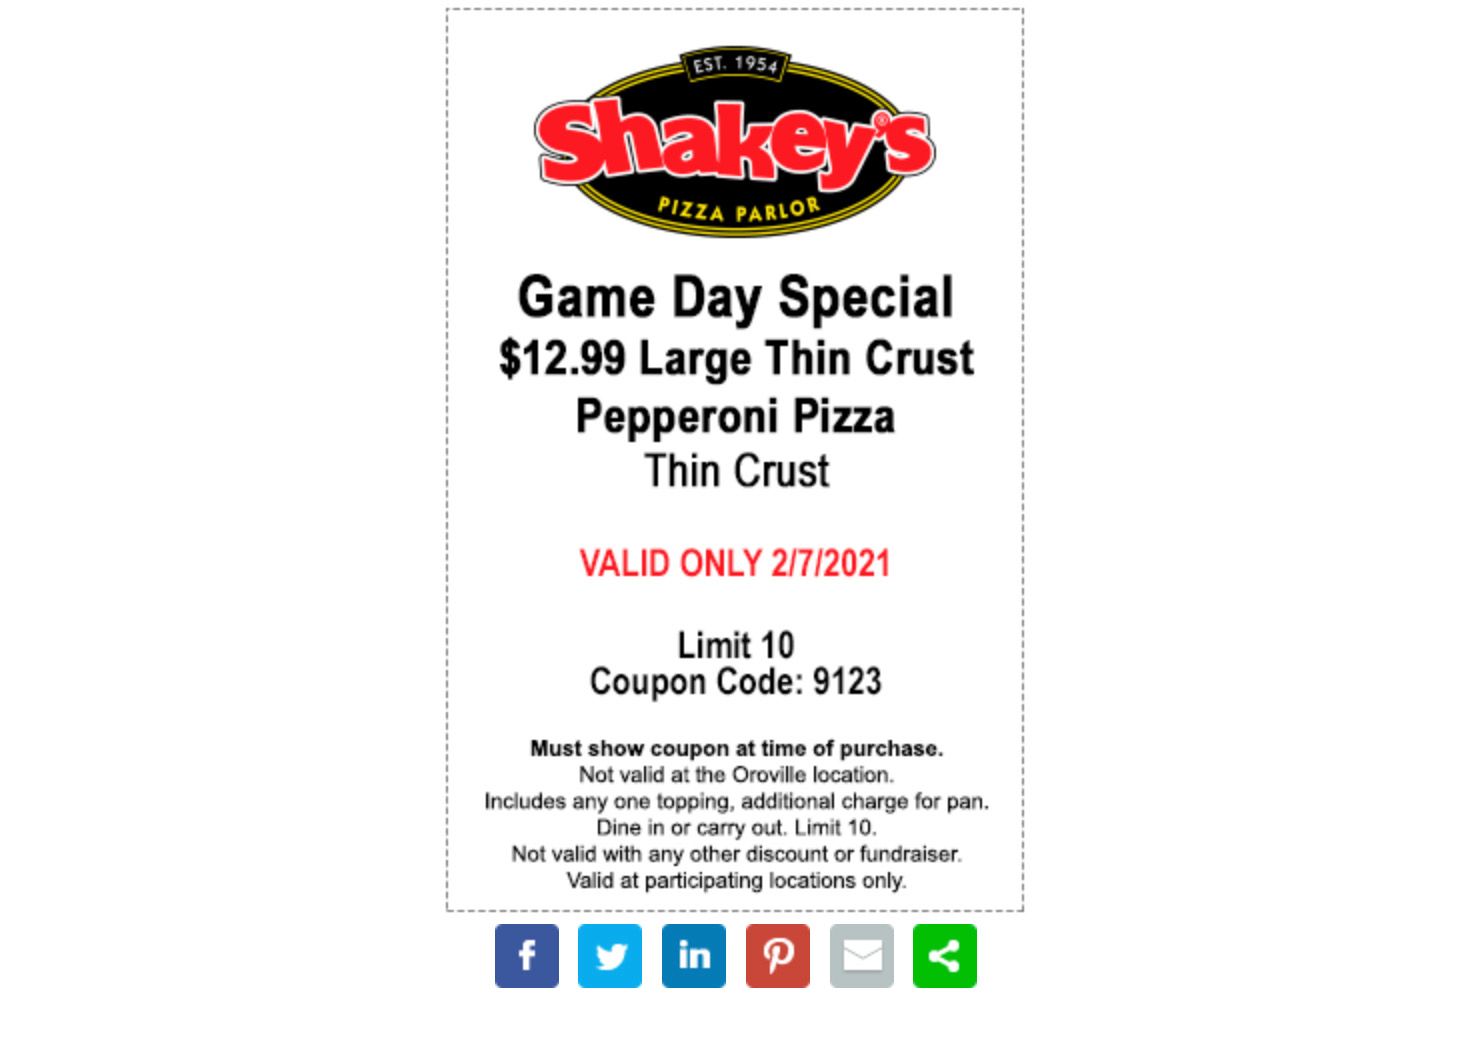 February 7 Only: Pizza Perks Members Check Your Inbox for a $12.99 Large Pepperoni Pizza Coupon at Shakey's Pizza